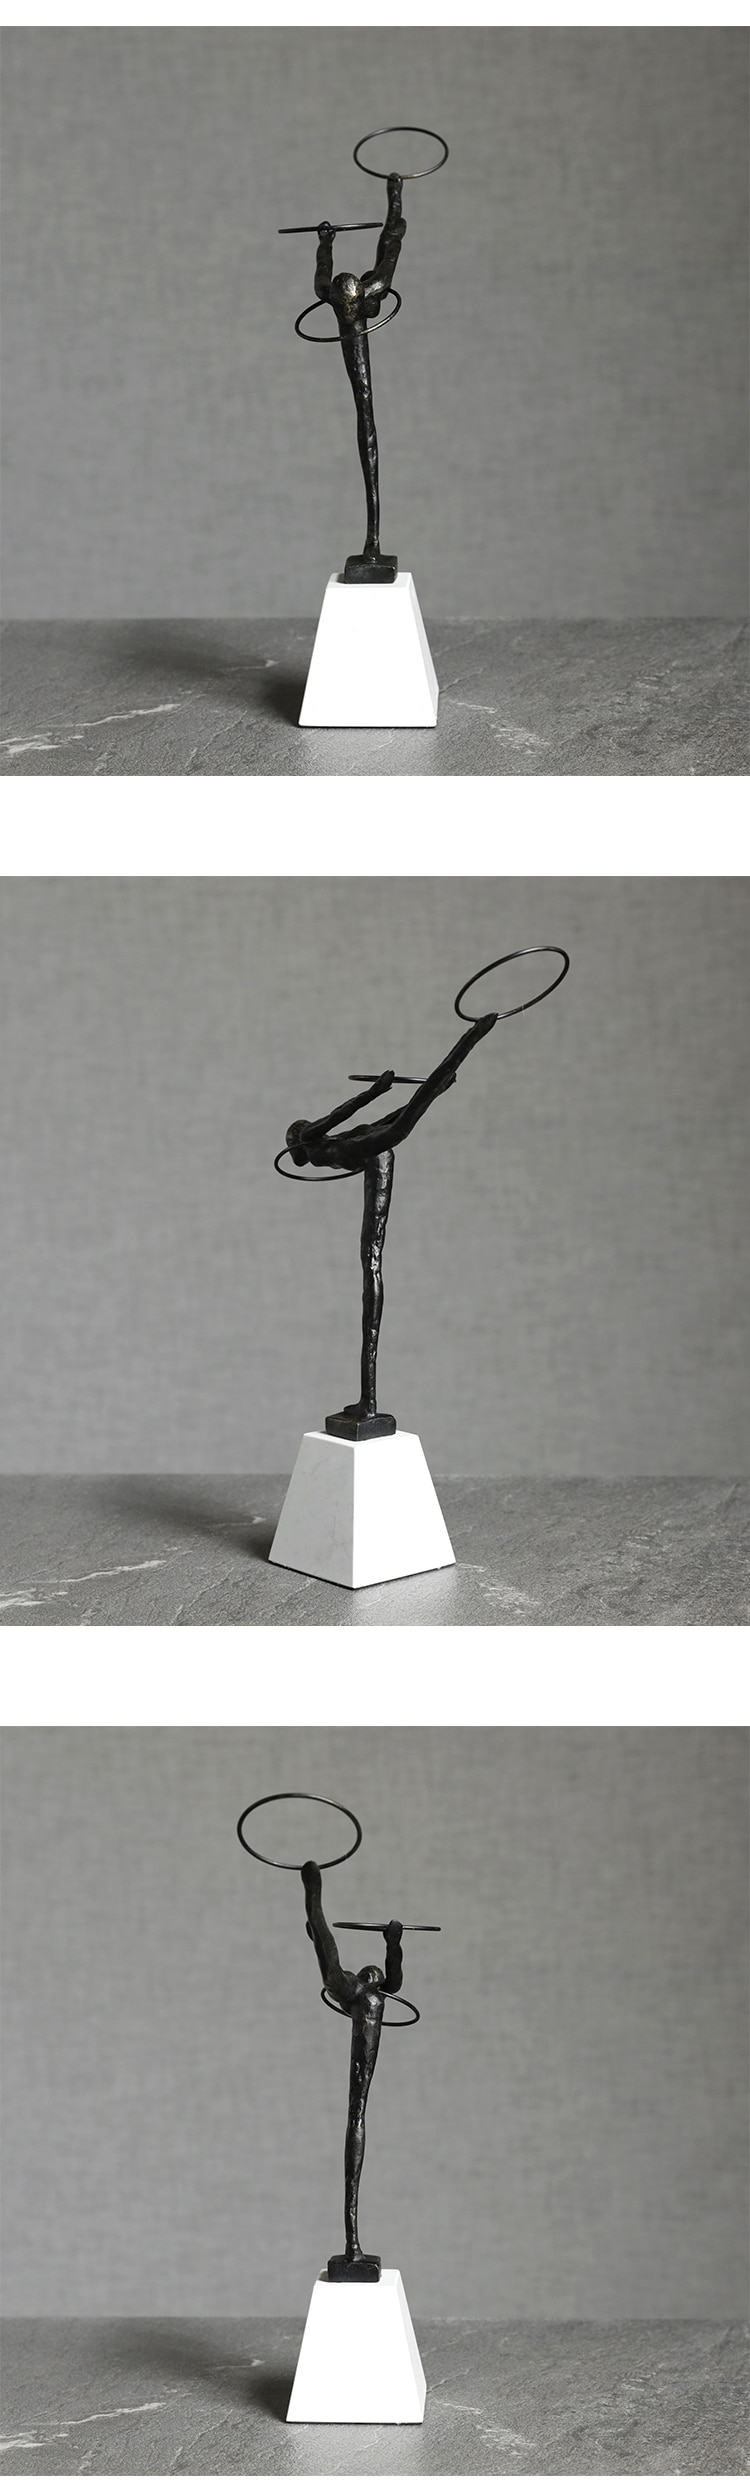 Abstract Sport Character Stand On Marble With One Hula Hoop Figurine Statue Home Living Room Decor Craft Modern Desktop Ornament